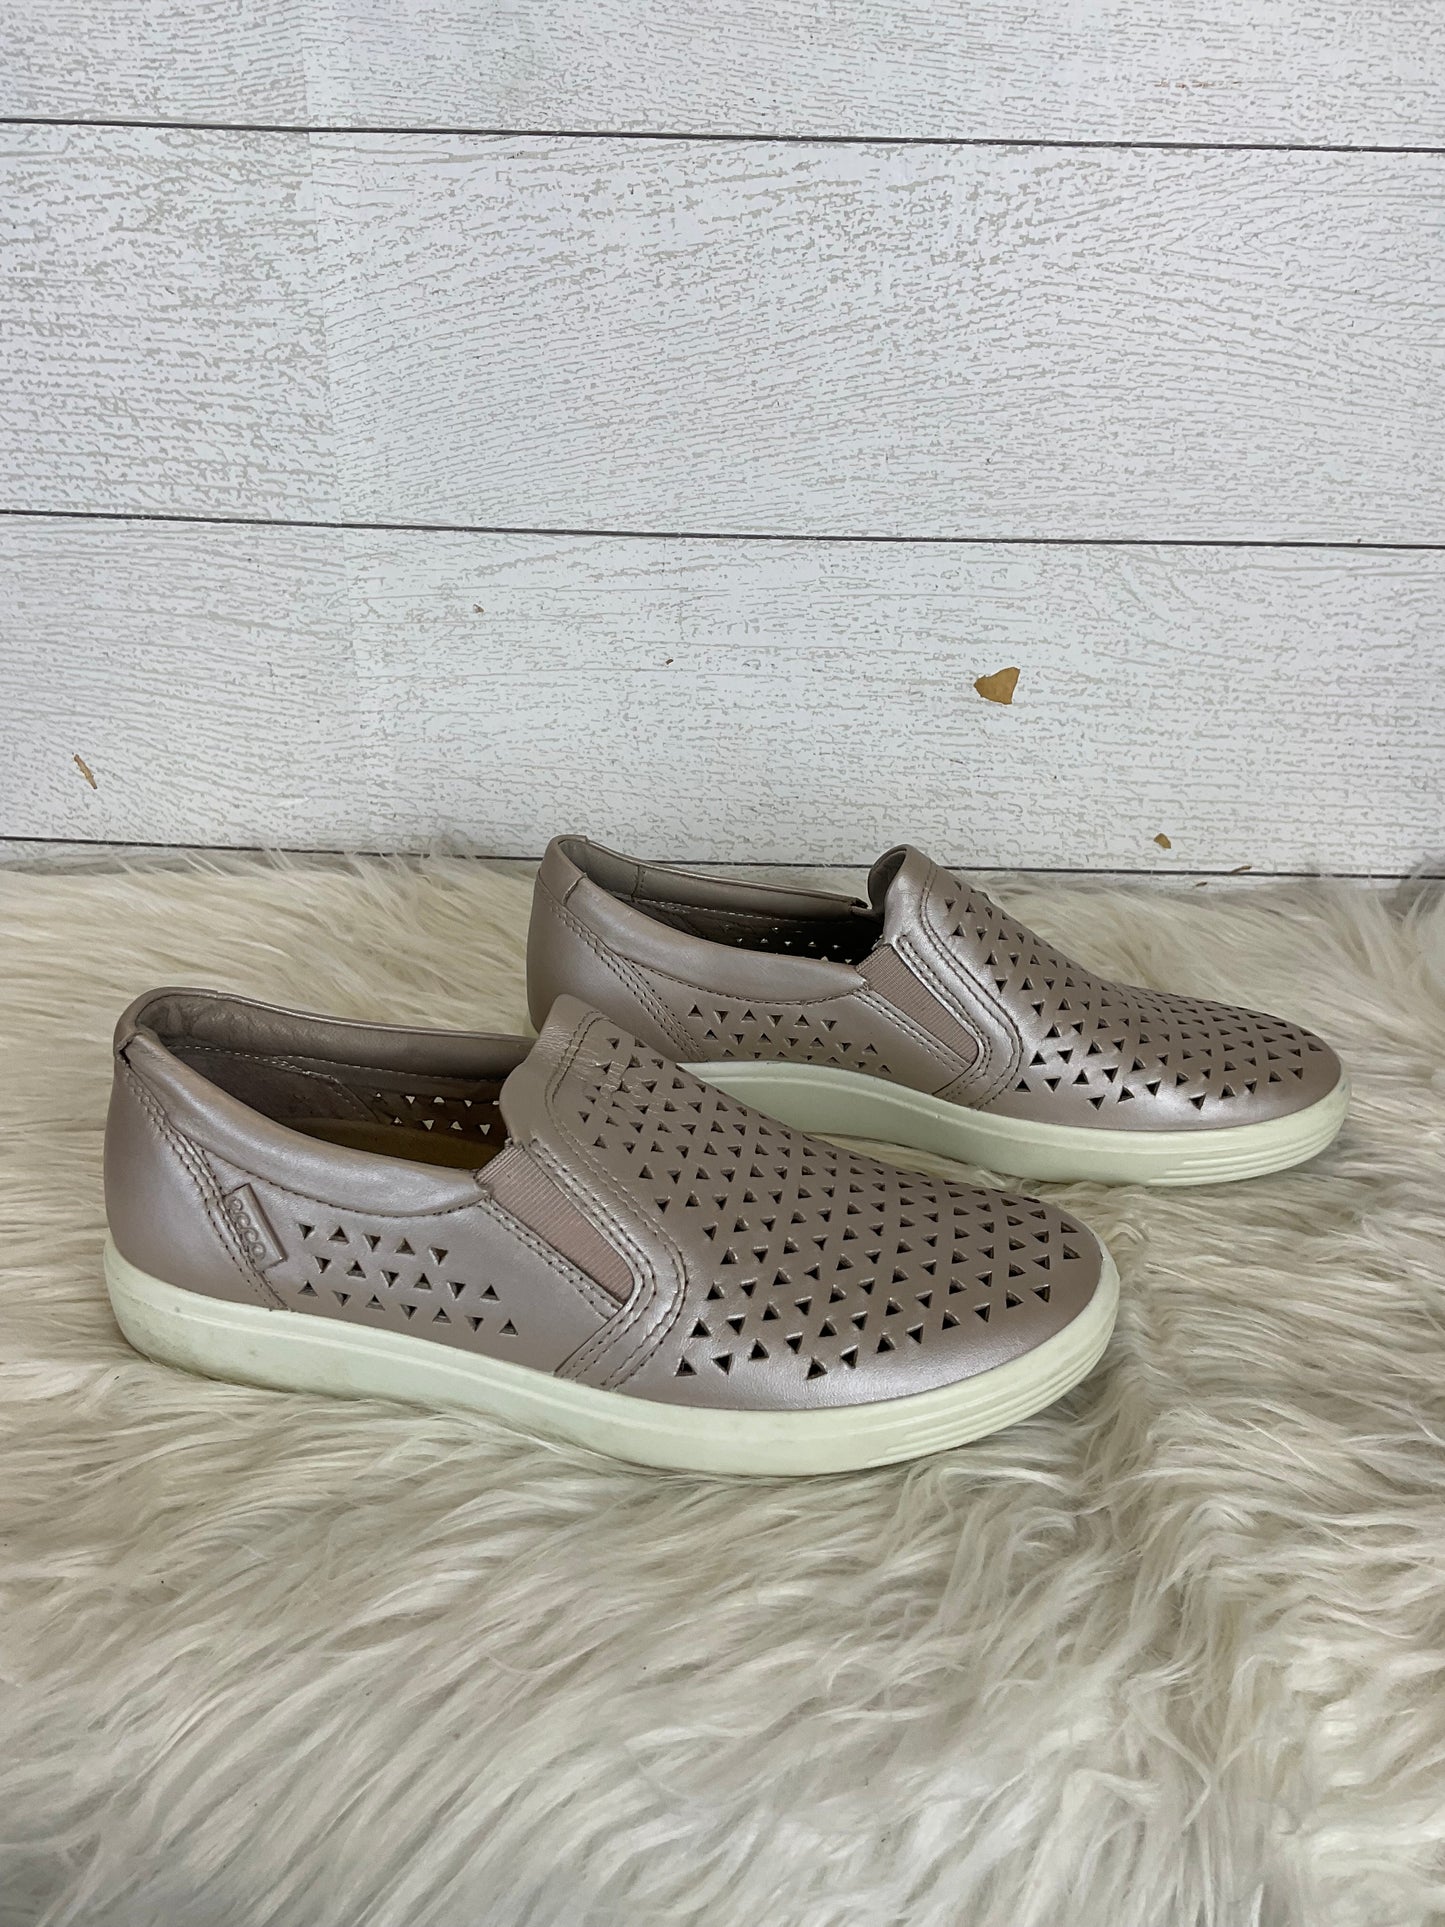 Shoes Flats Boat By Ecco  Size: 5